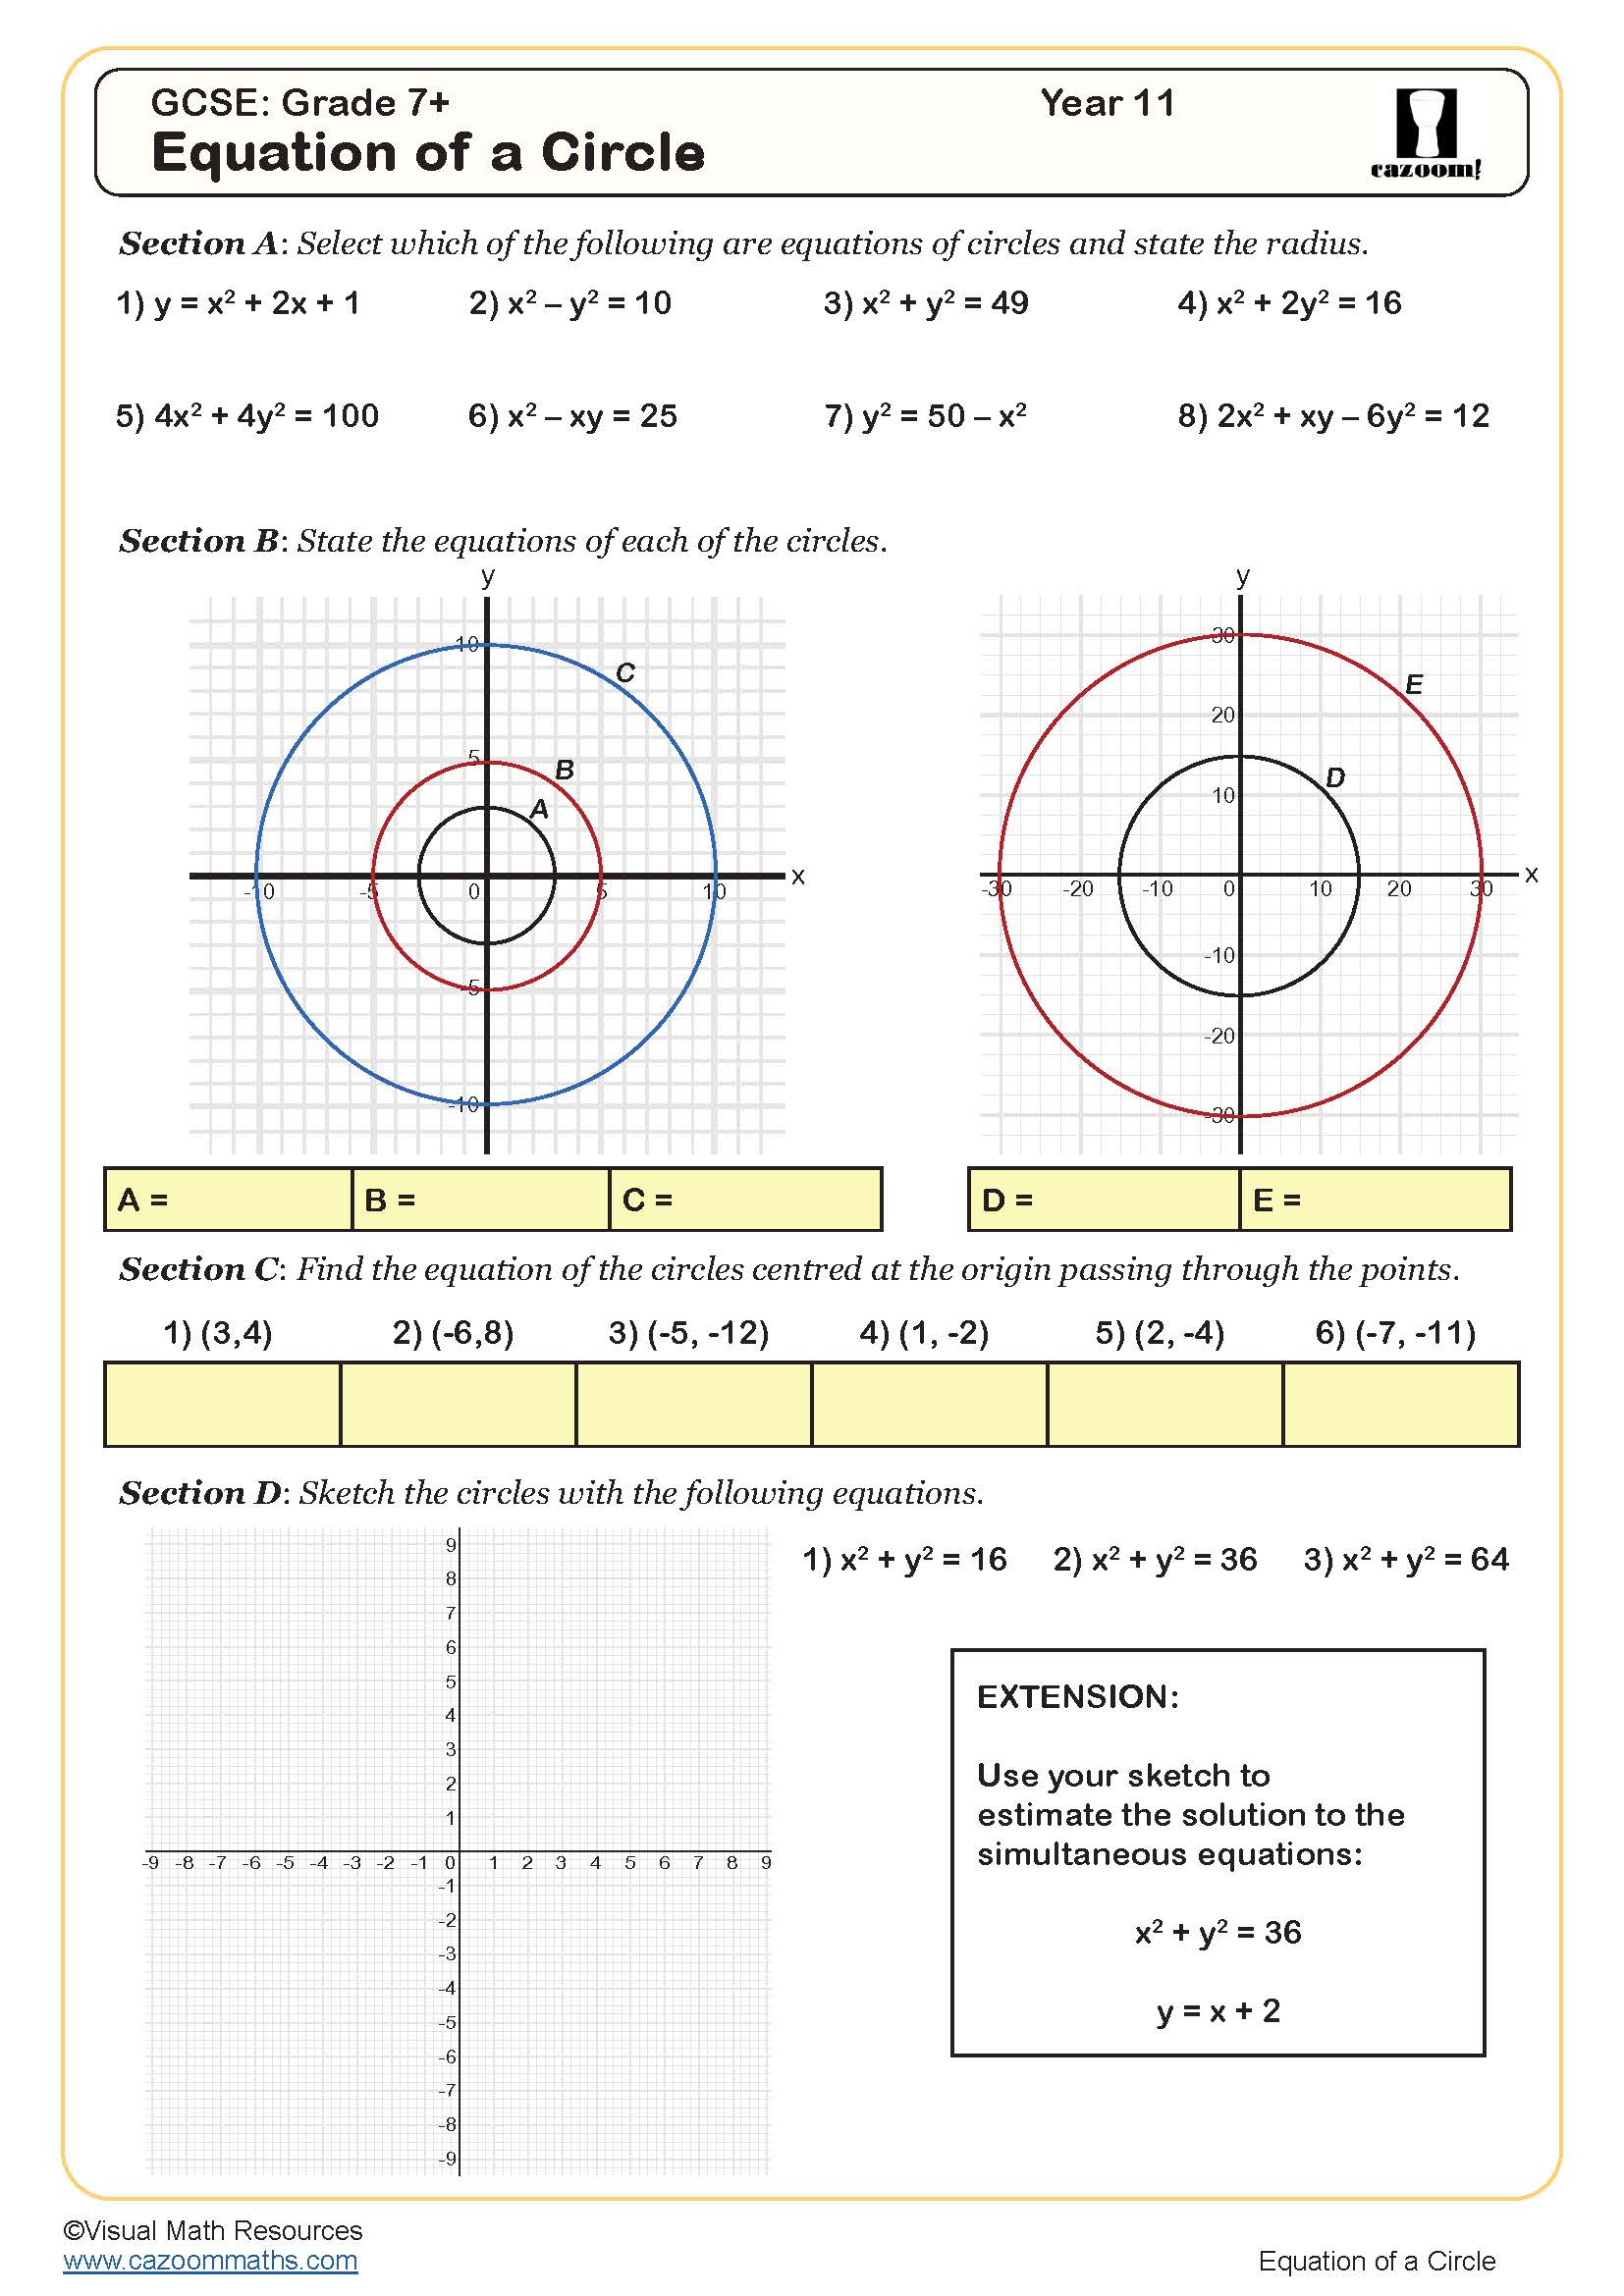 Equation of a circle Worksheet perfect for students in year 10 and year 11